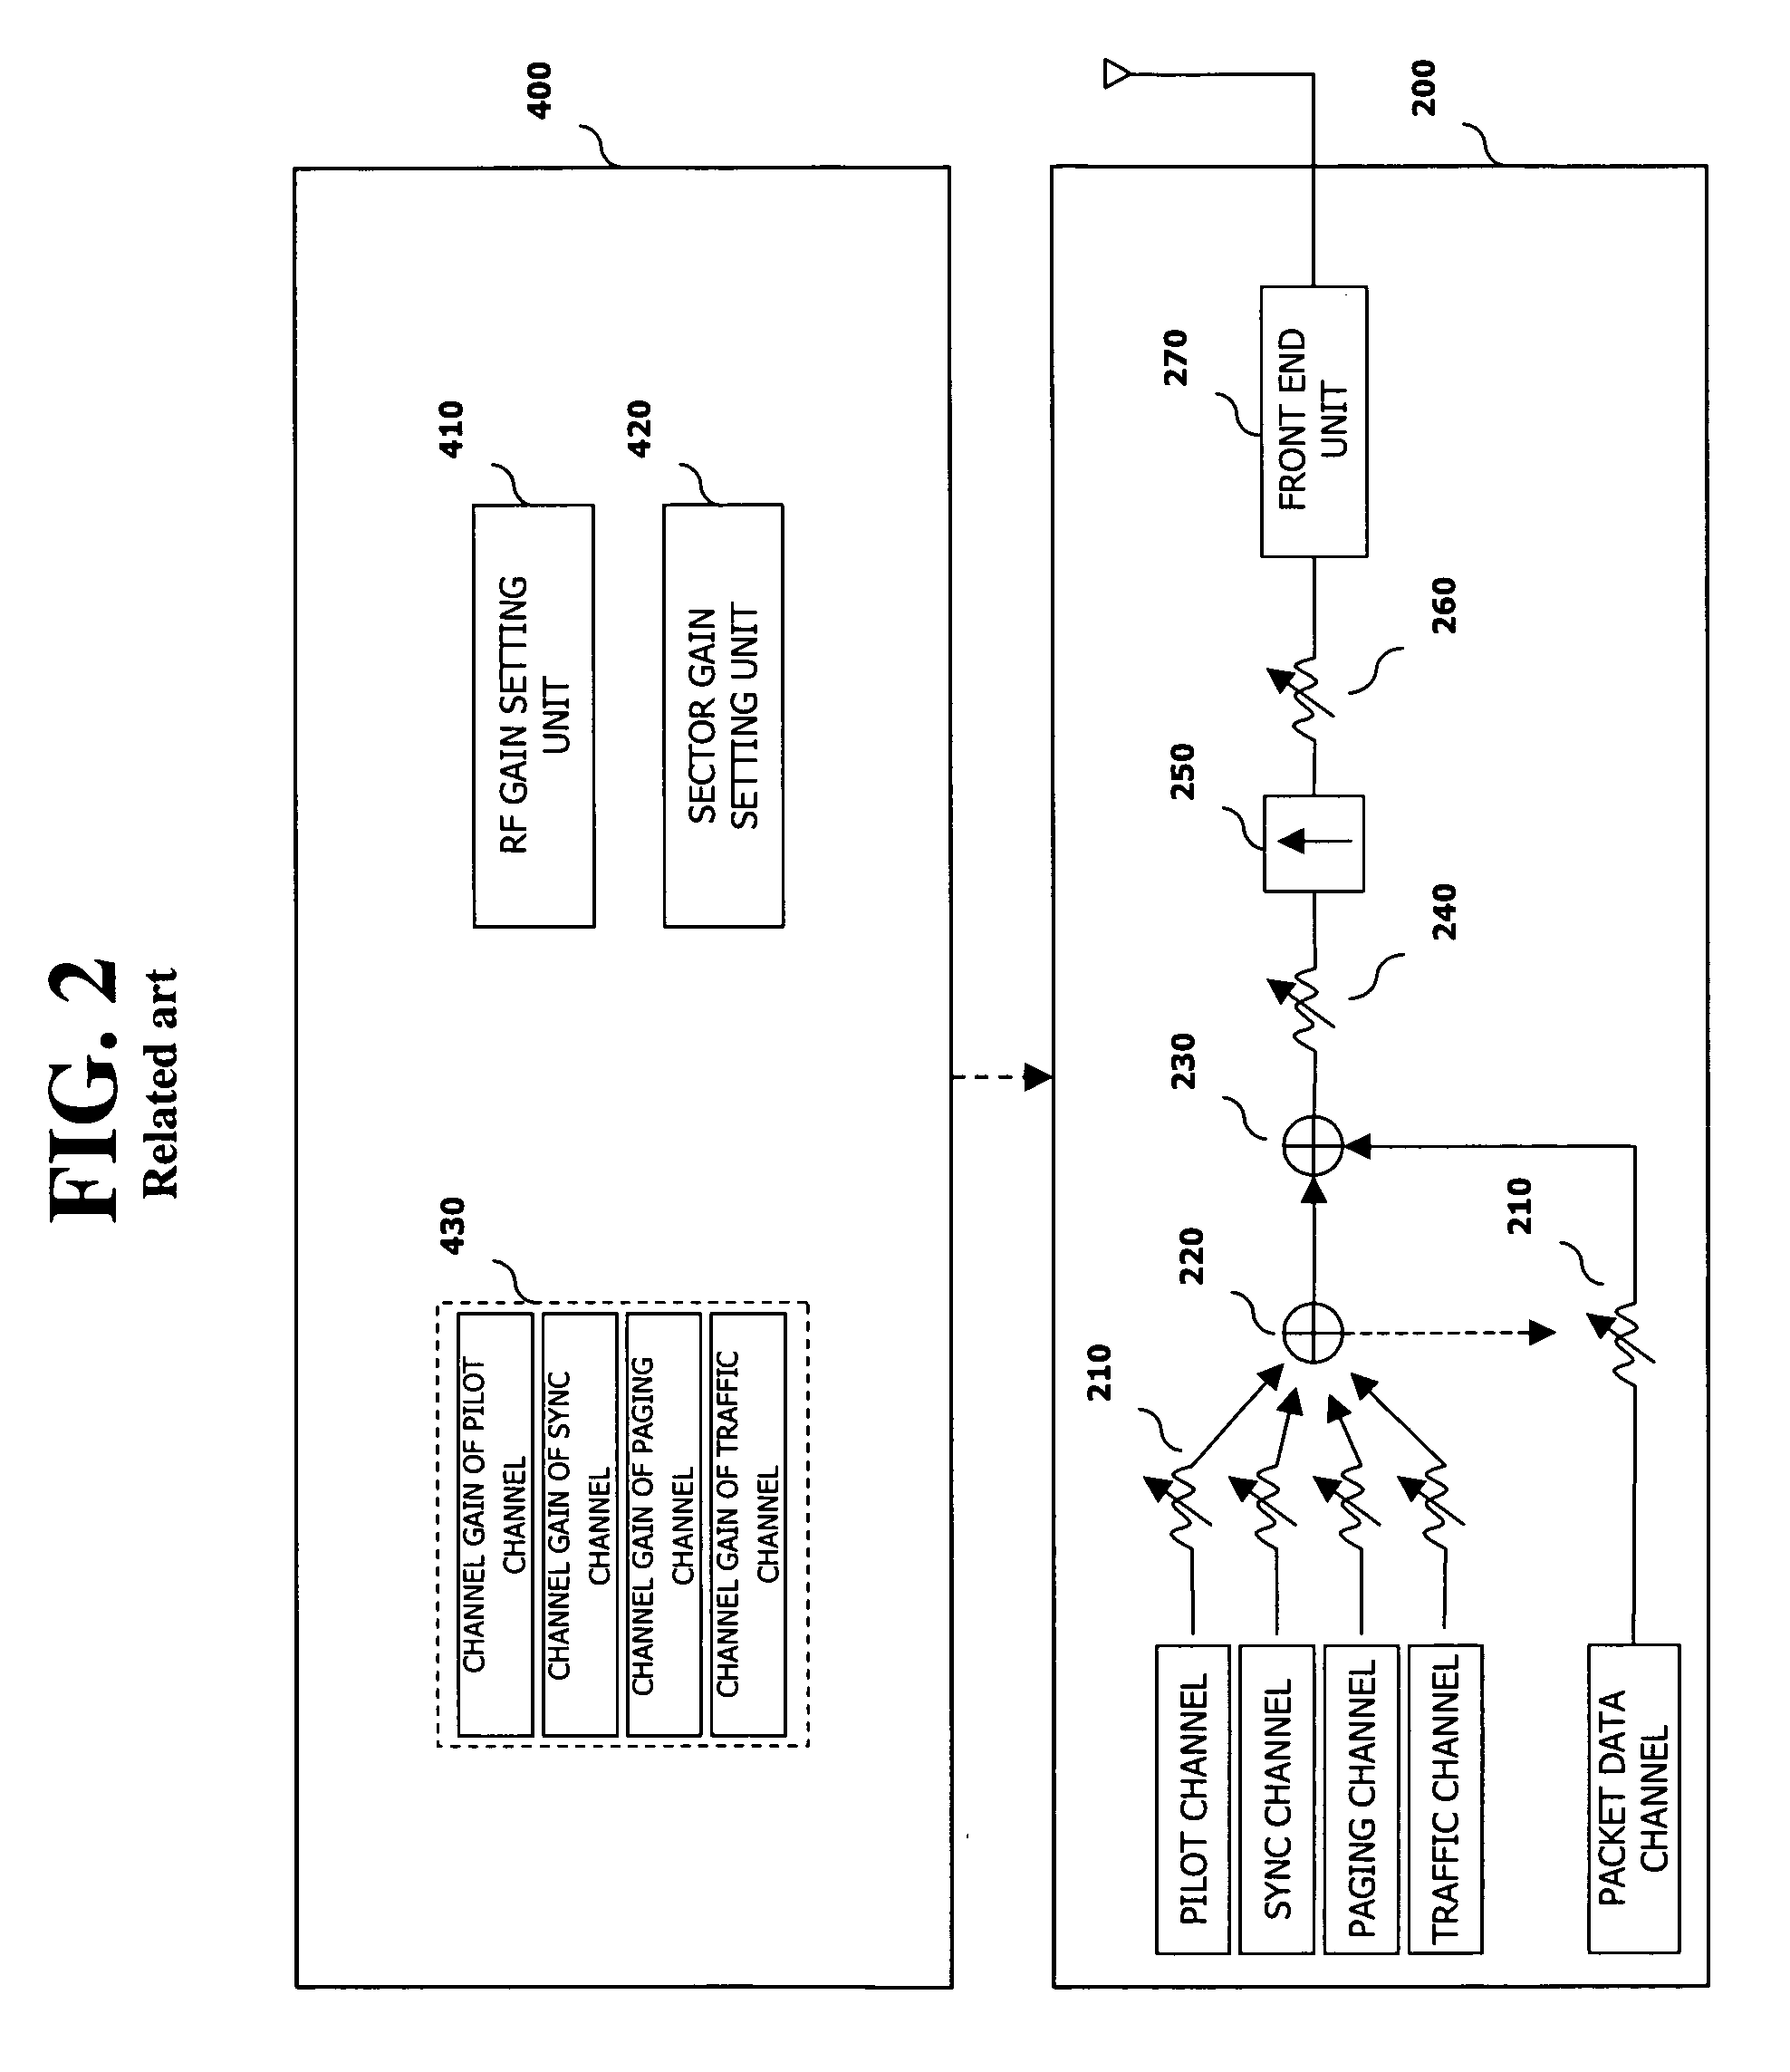 Transmission power control of a base station in a mobile communication system